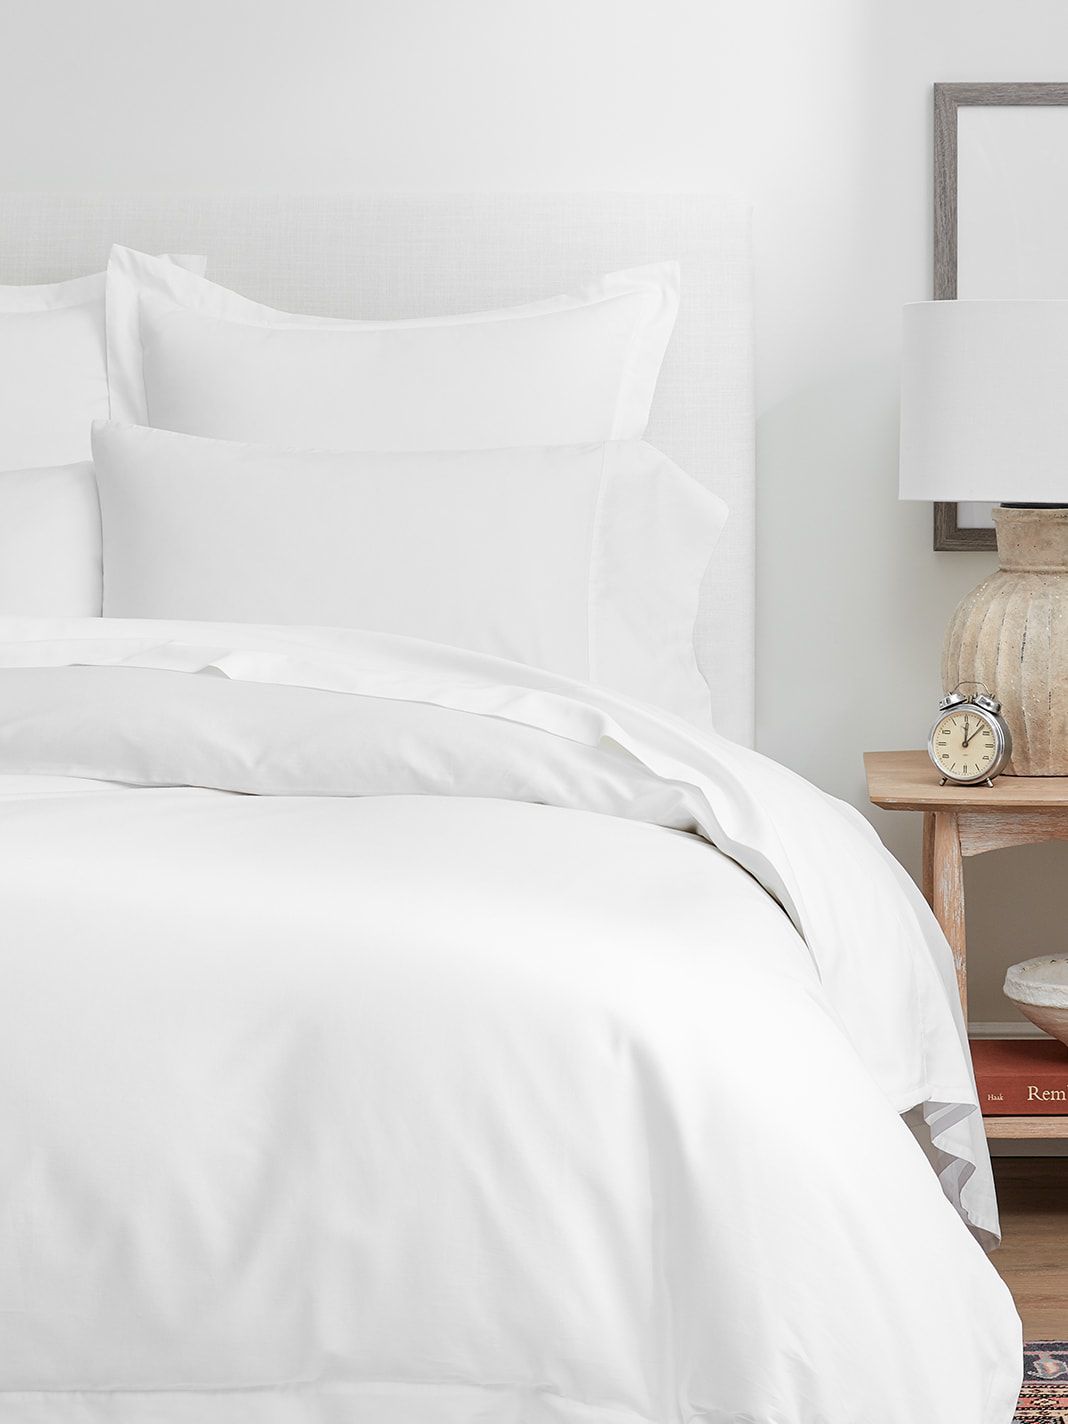 The 9 Best Bed Sheets We’ve *Ever* Tested